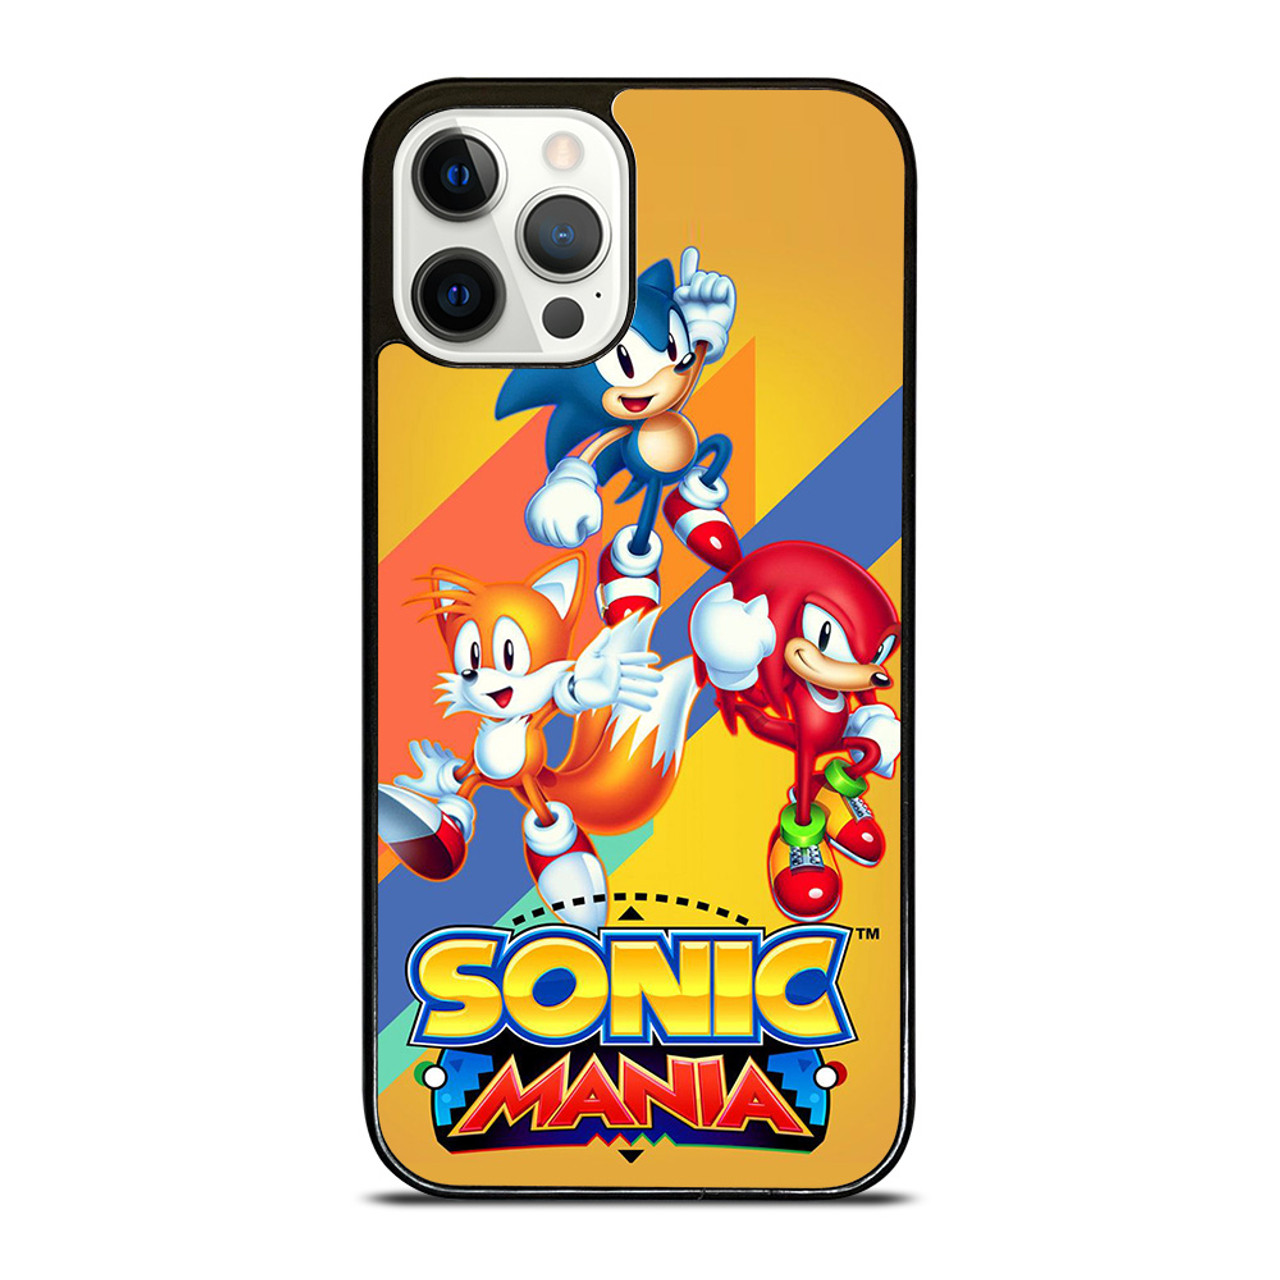 DARK SONIC THE HEDGEHOG iPhone X / XS Case Cover